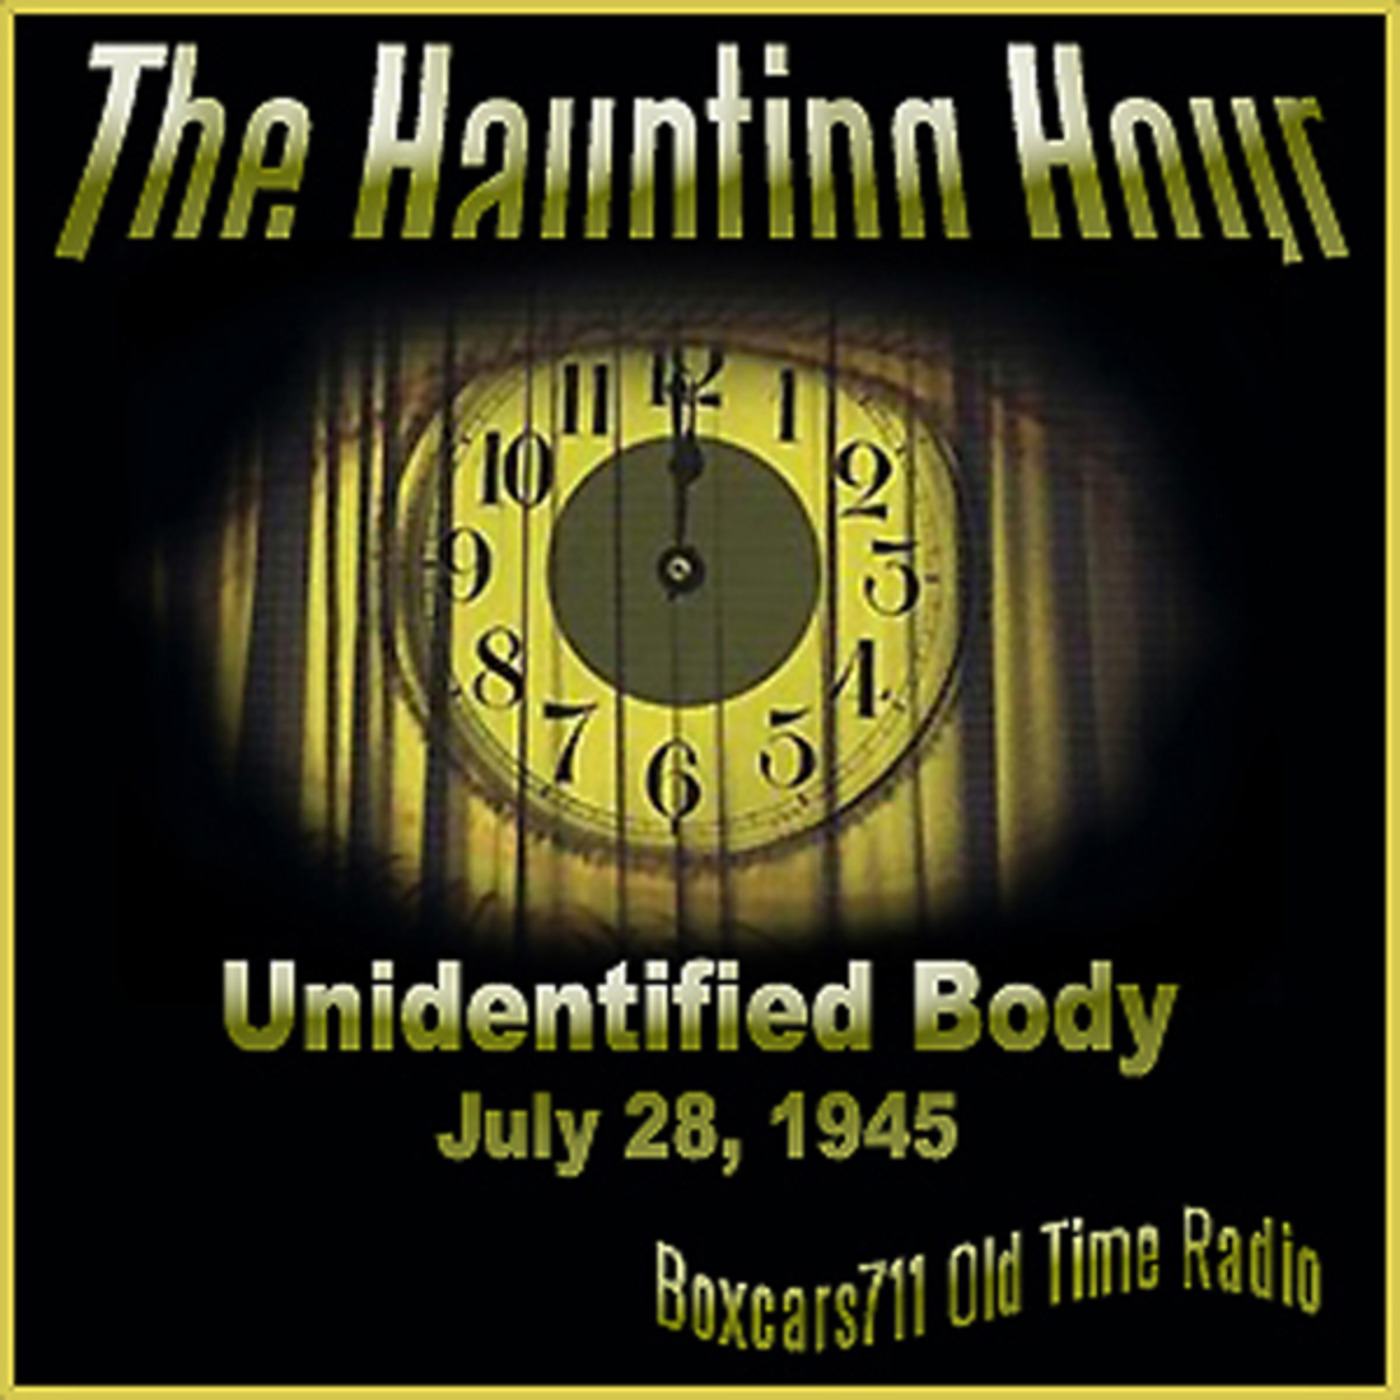 Episode 9587: The Haunting Hour - 